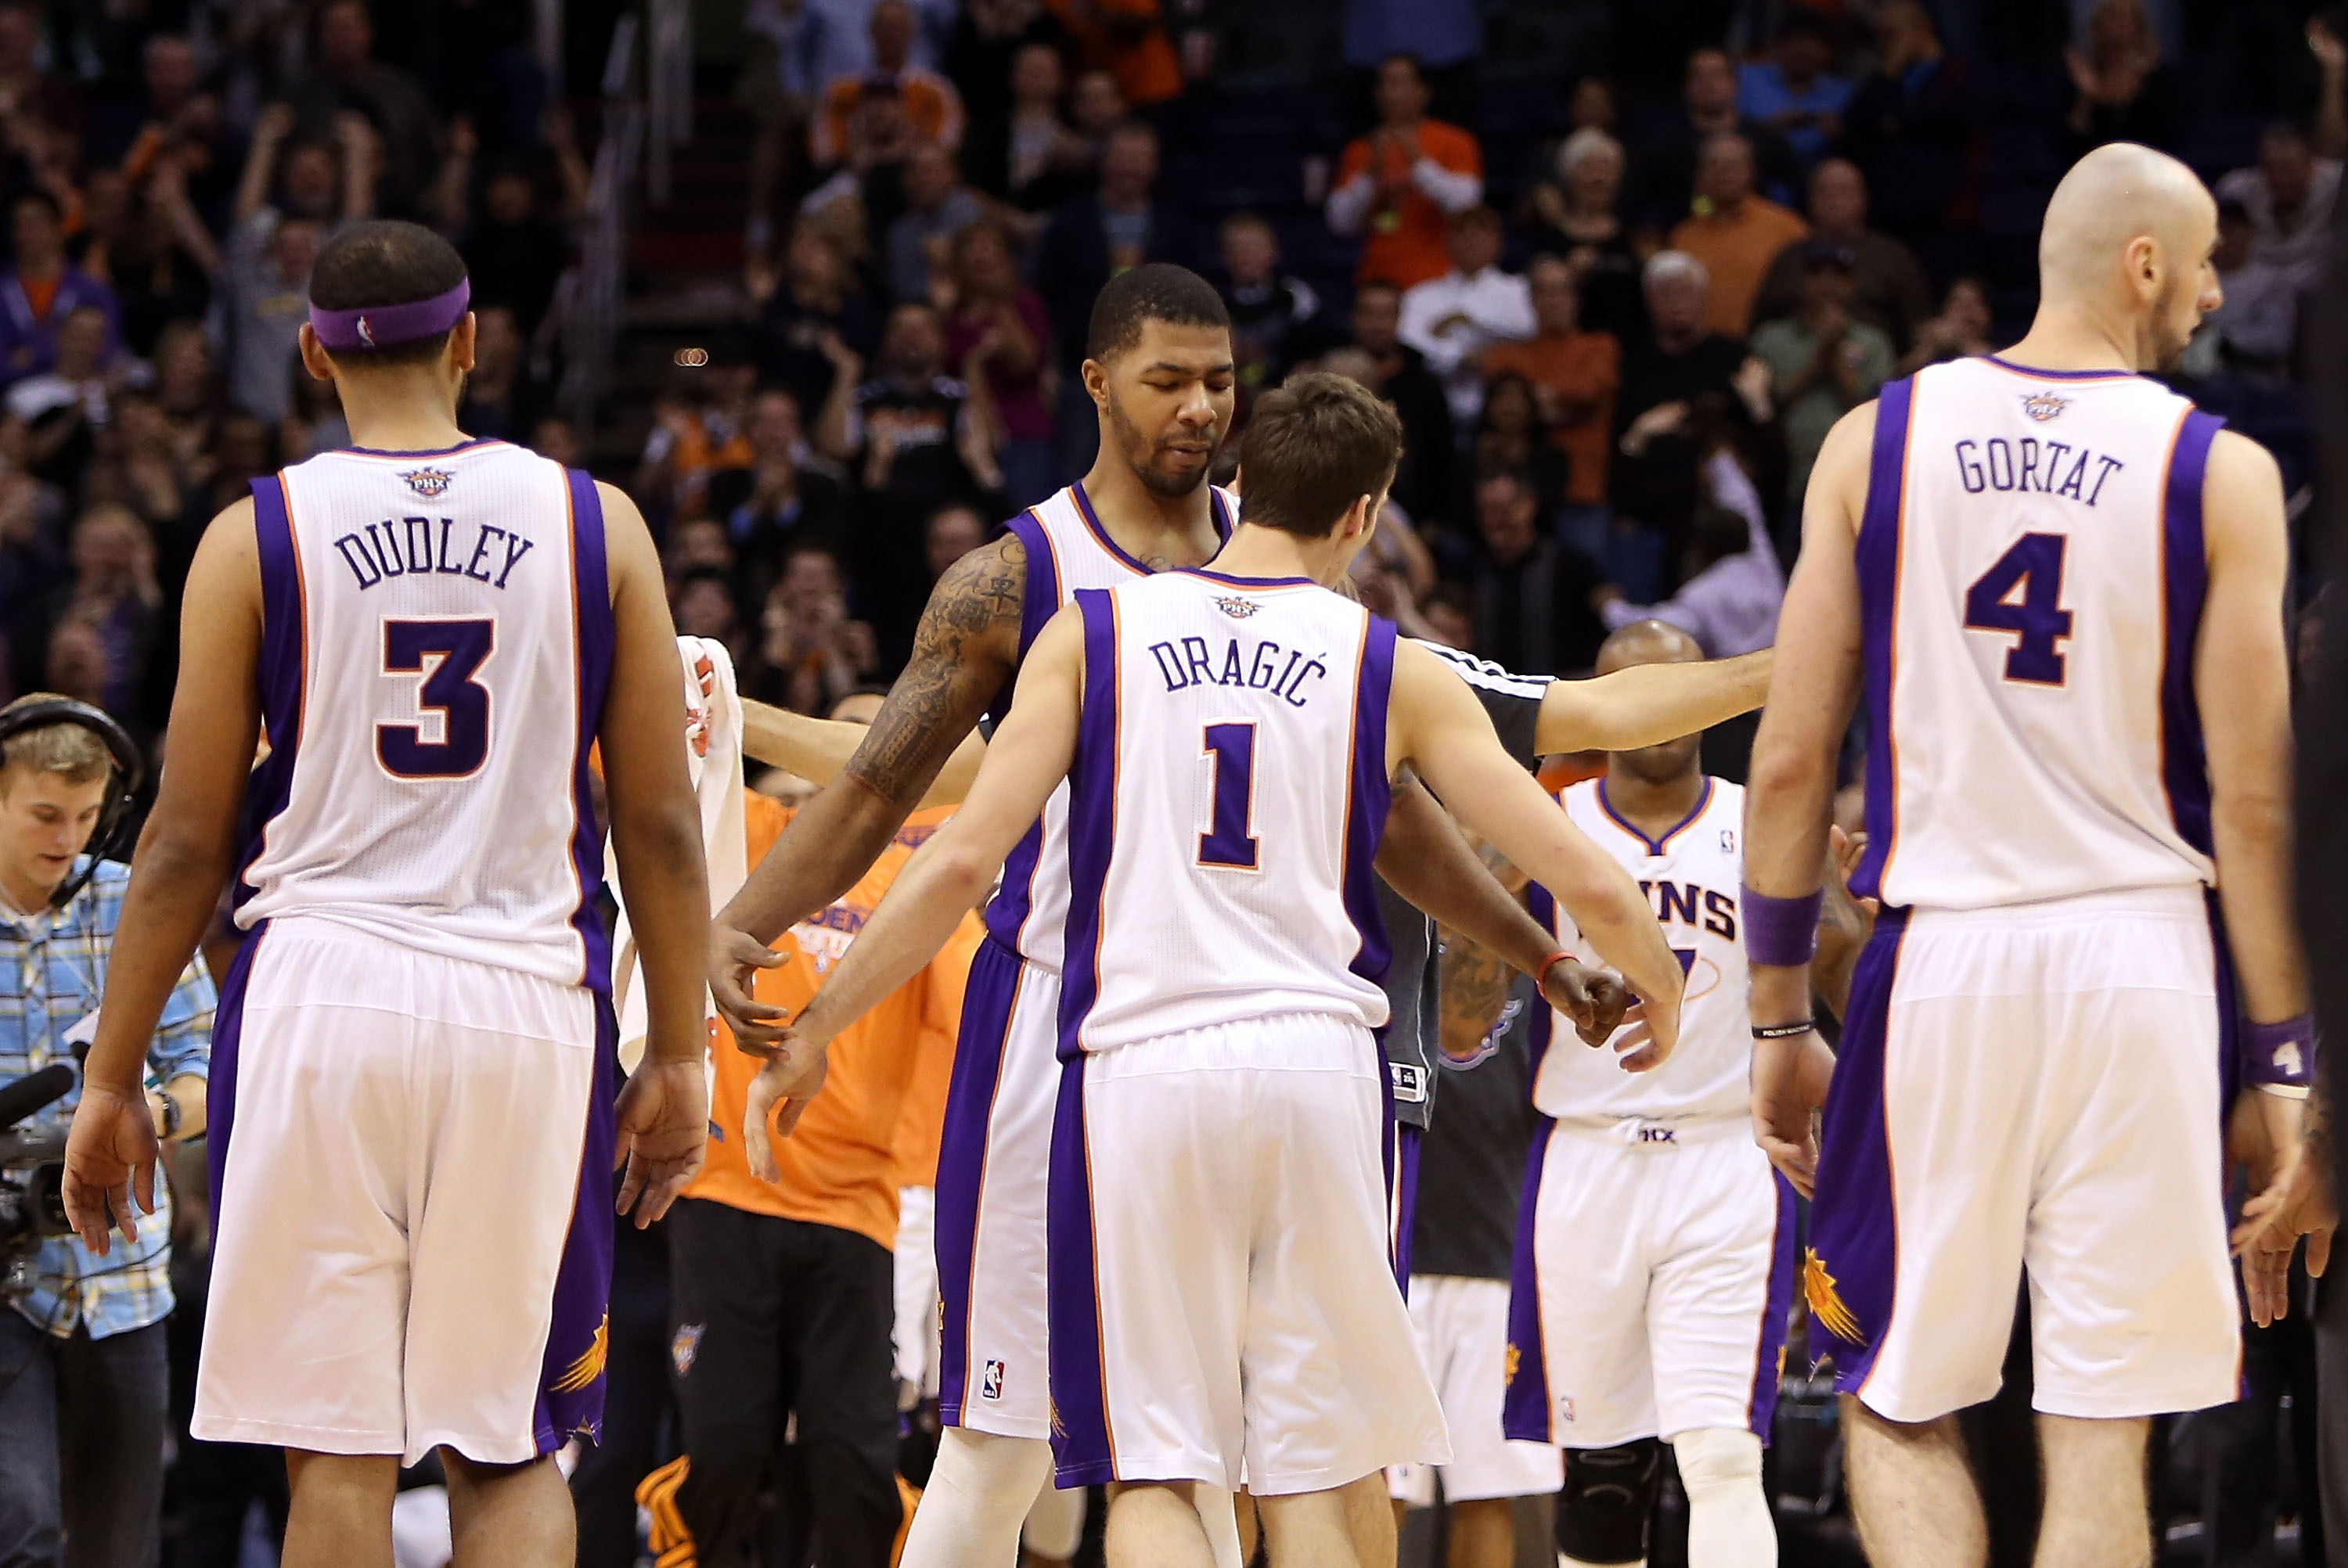 Suns Rookie Kendall Marshall's Picture With Teammates Jermaine O